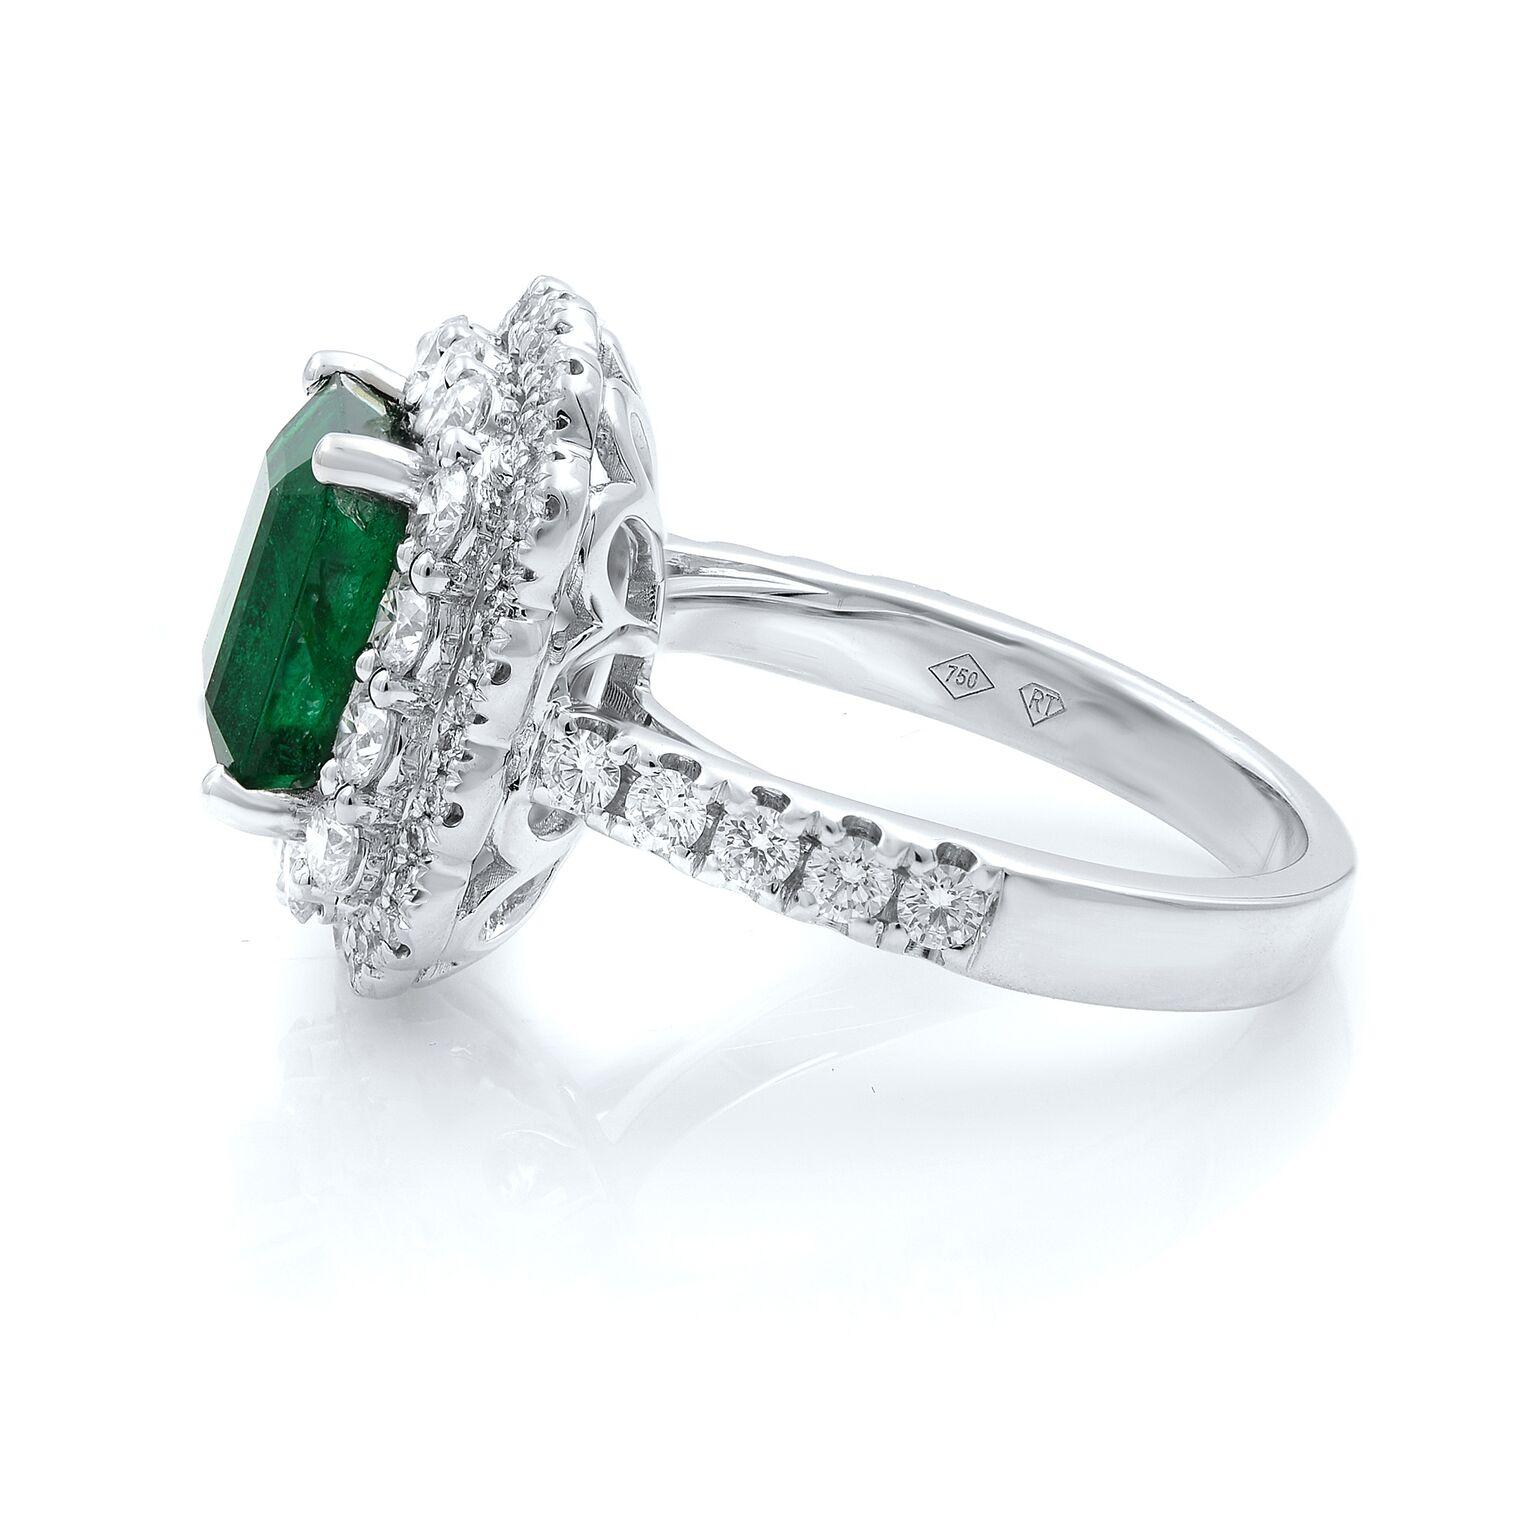 Our beautiful green emerald and diamonds engagement ring. 18k white gold. Emerald cut is totaling in 2.95cts and diamonds are 1.26cts. GIA certificate included. Size: 6.75. 